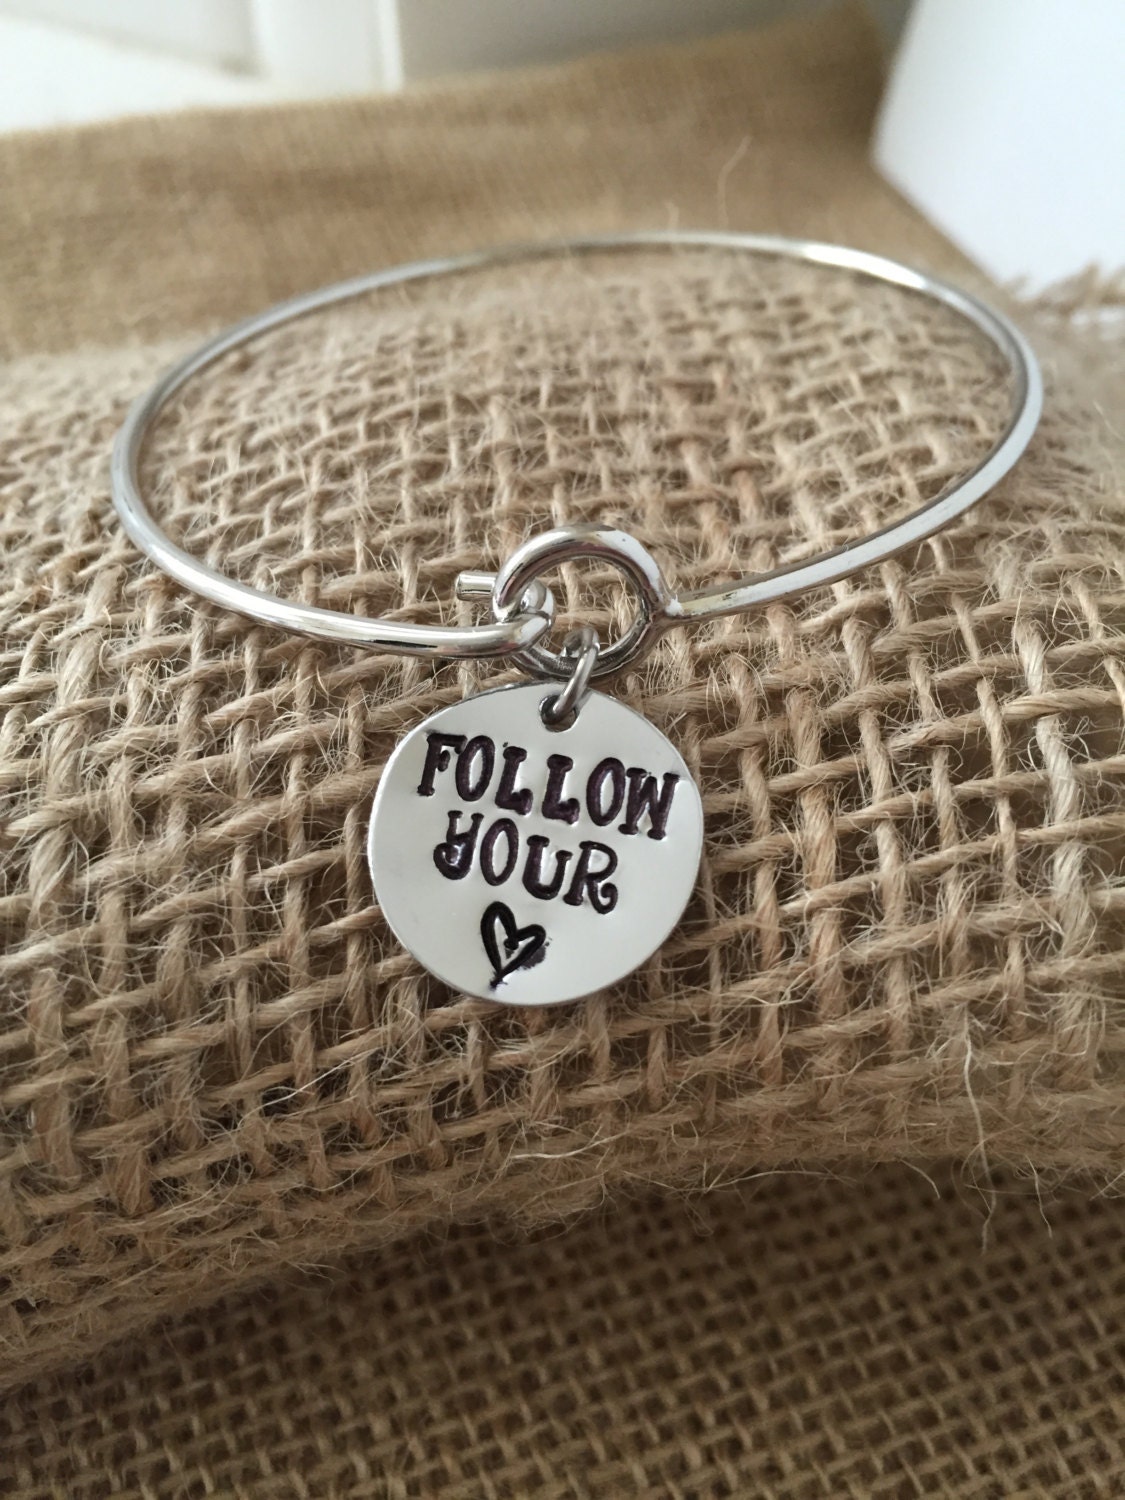 Follow Your Heart Bracelet, Graduation Gift, Inspirational Gift, Hand Stamped Jewelry, Hand Stamped Bracelet, Fired and Wired, Gift Bracelet